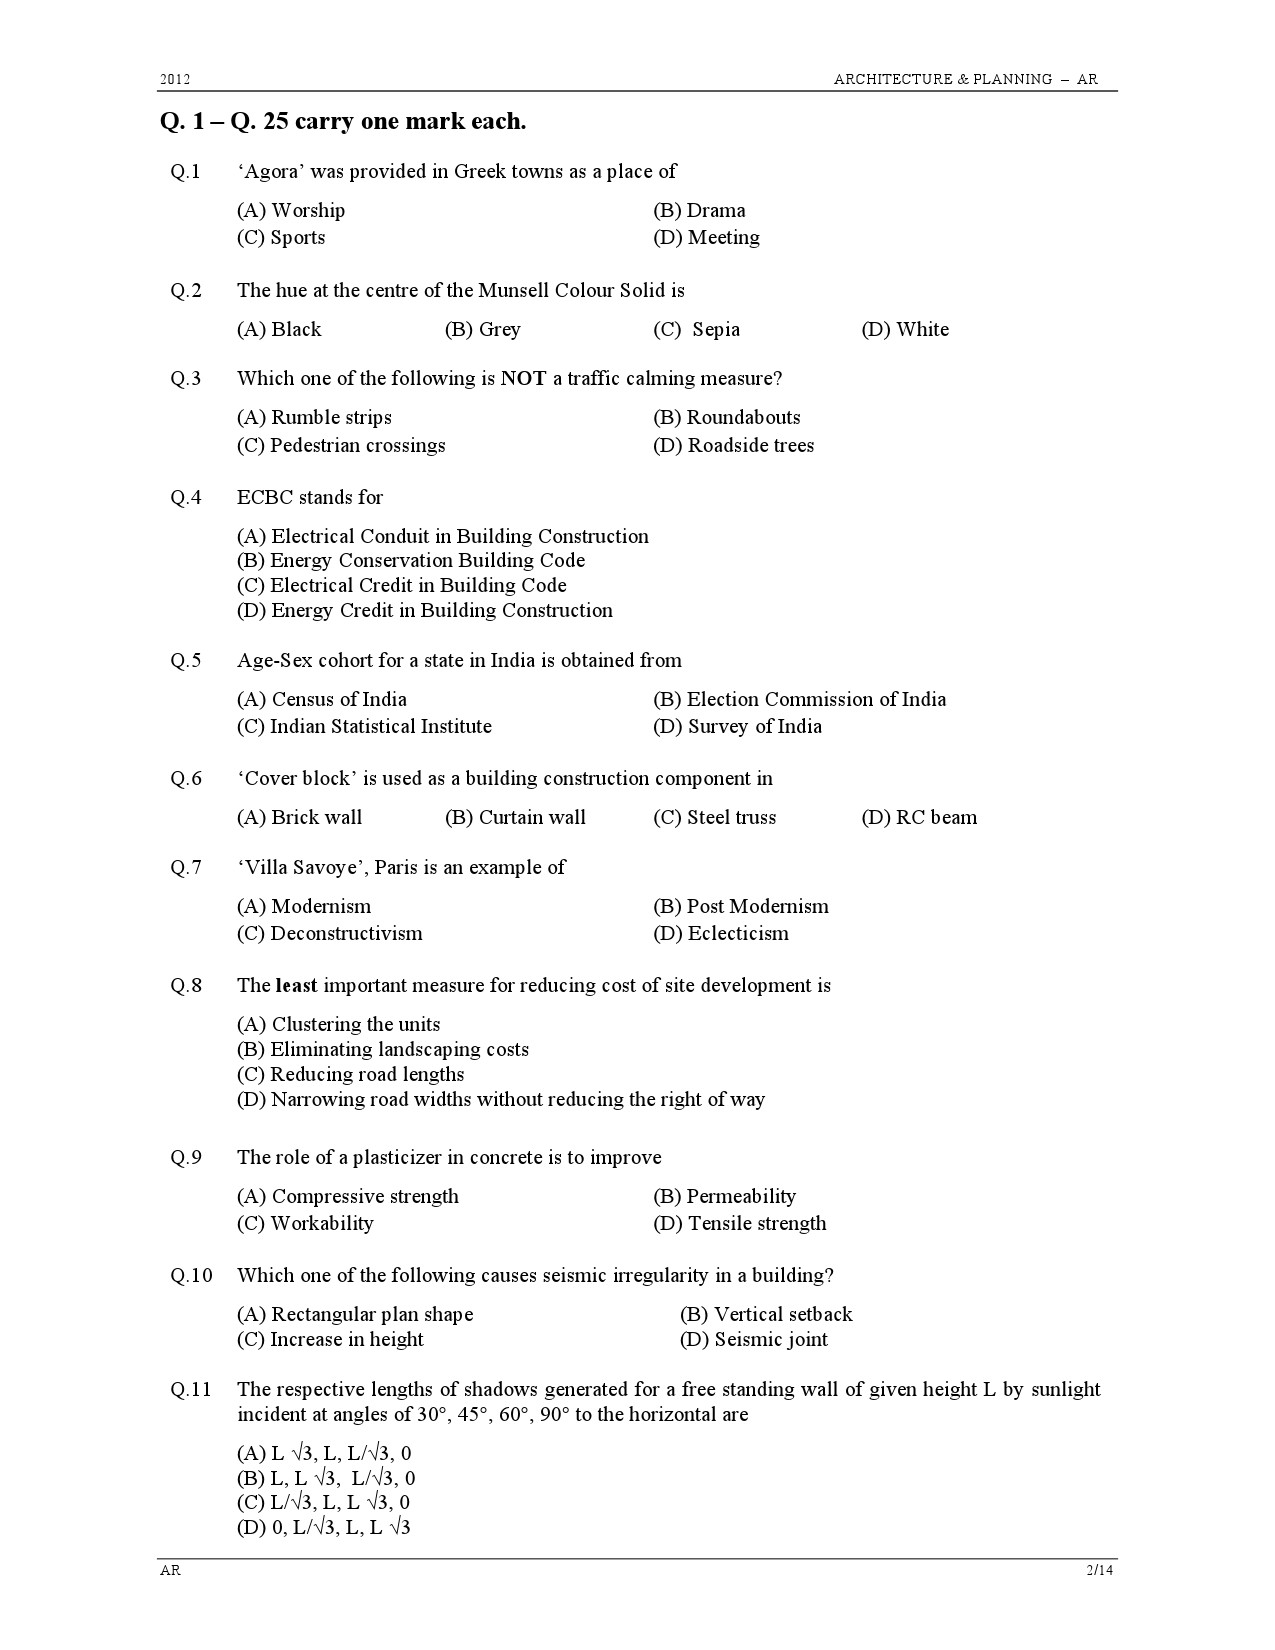 GATE Exam Question Paper 2012 Architecture and Planning 2